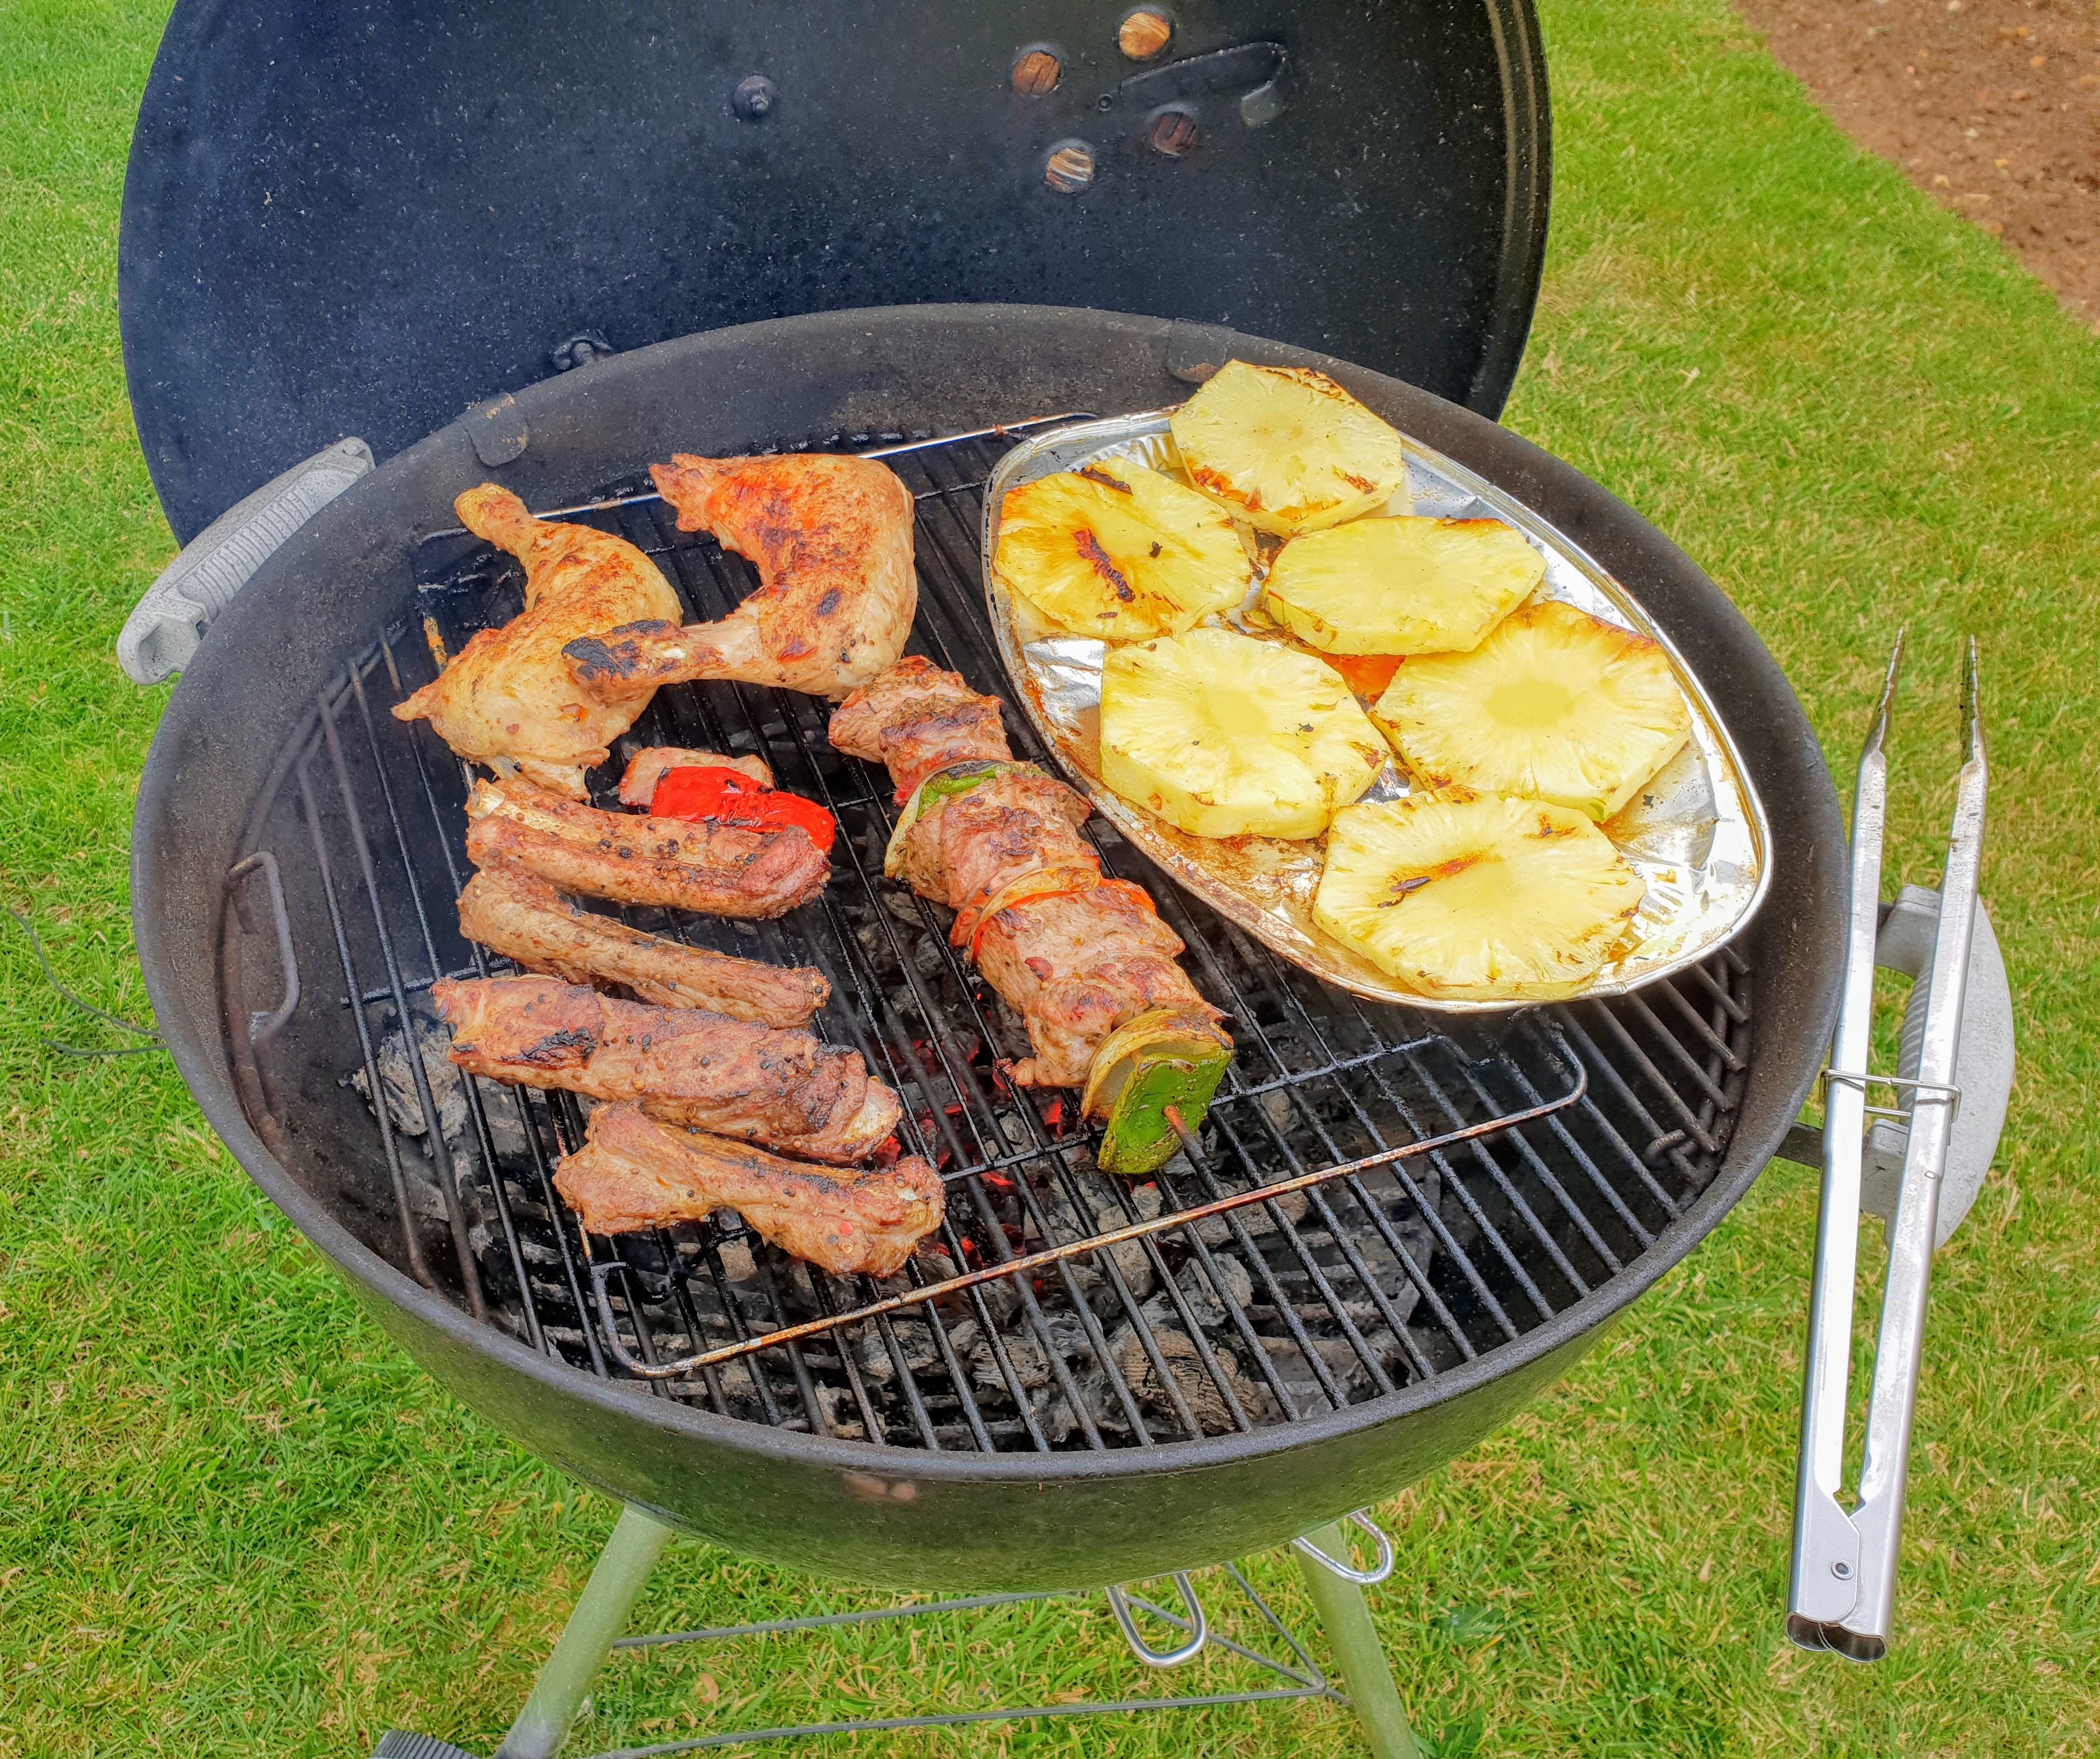 Weber charcoal BBQ - what am I doing wrong? - Page 11 - Food, Drink & Restaurants - PistonHeads